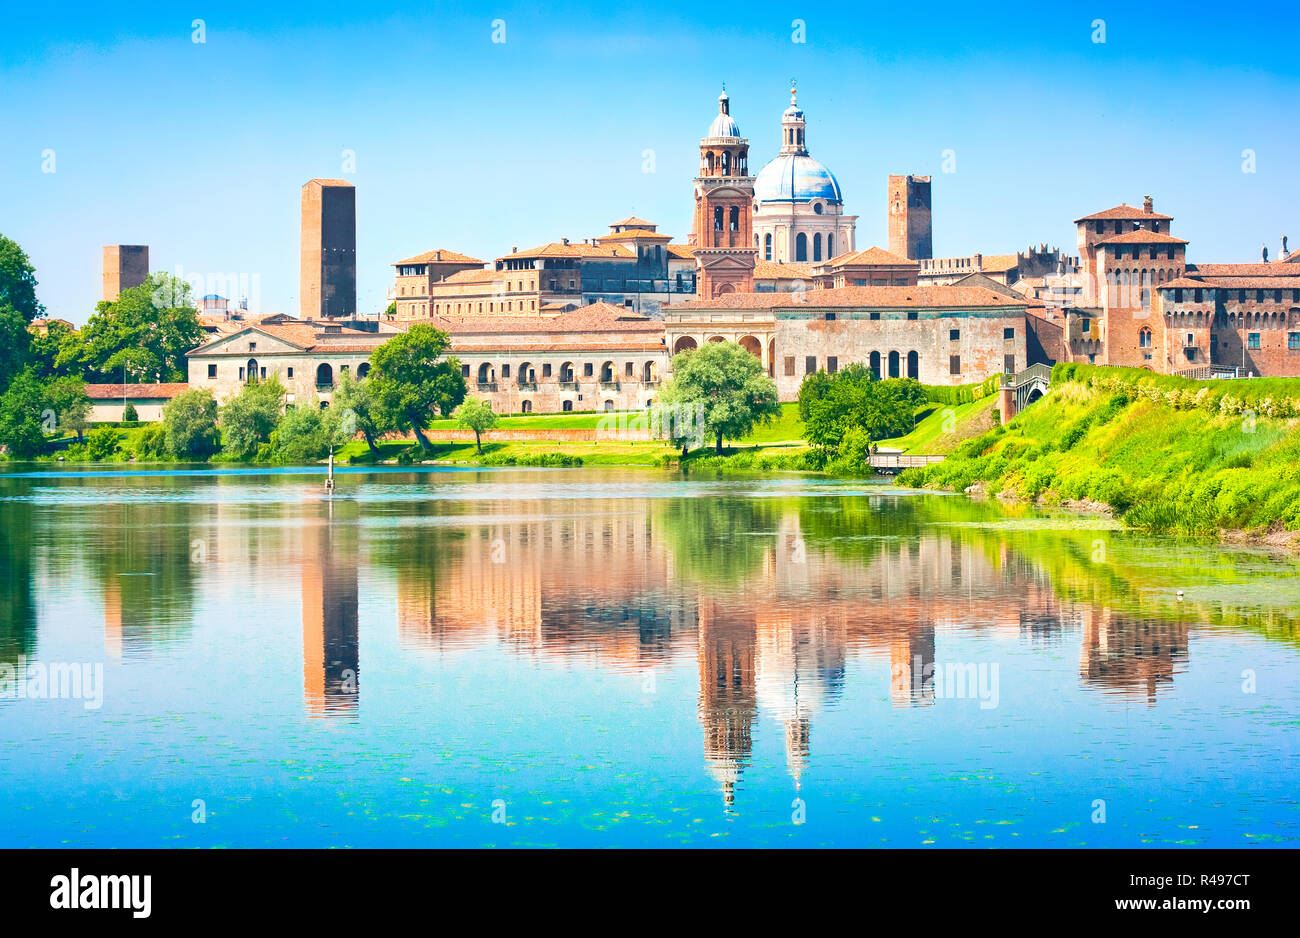 Medieval city of Mantua in Lombardy, Italy Stock Photo